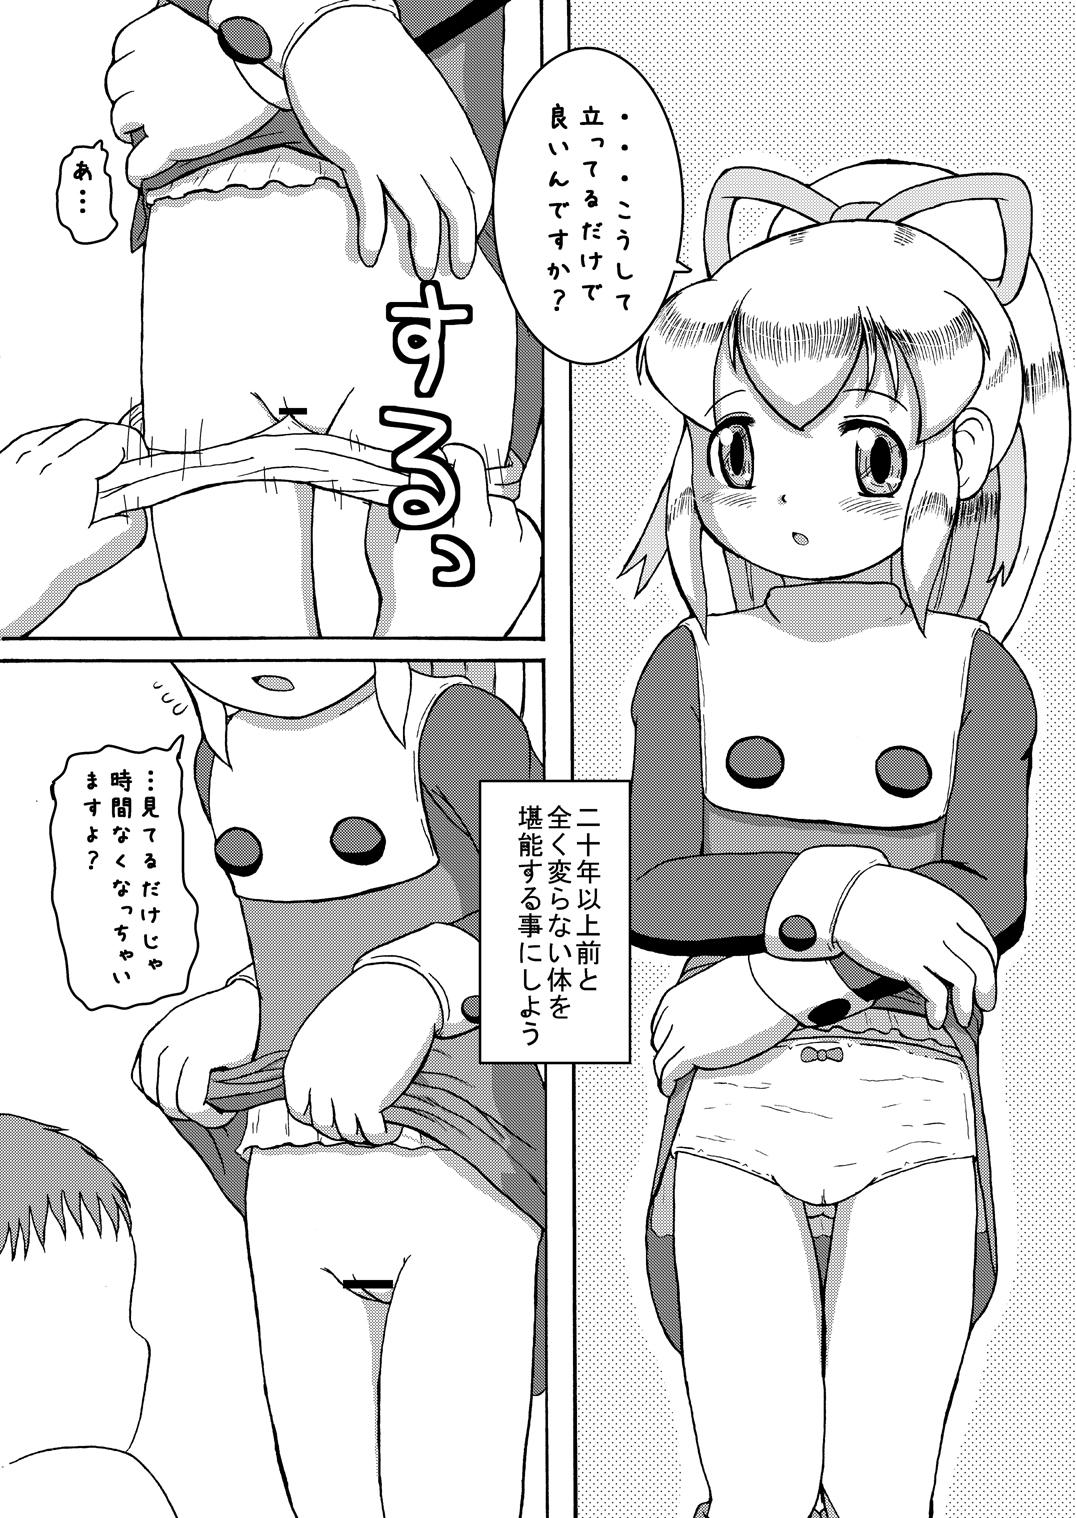 White Girl LoveRoLL+DDD - Megaman Cyberbots Camwhore - Page 3